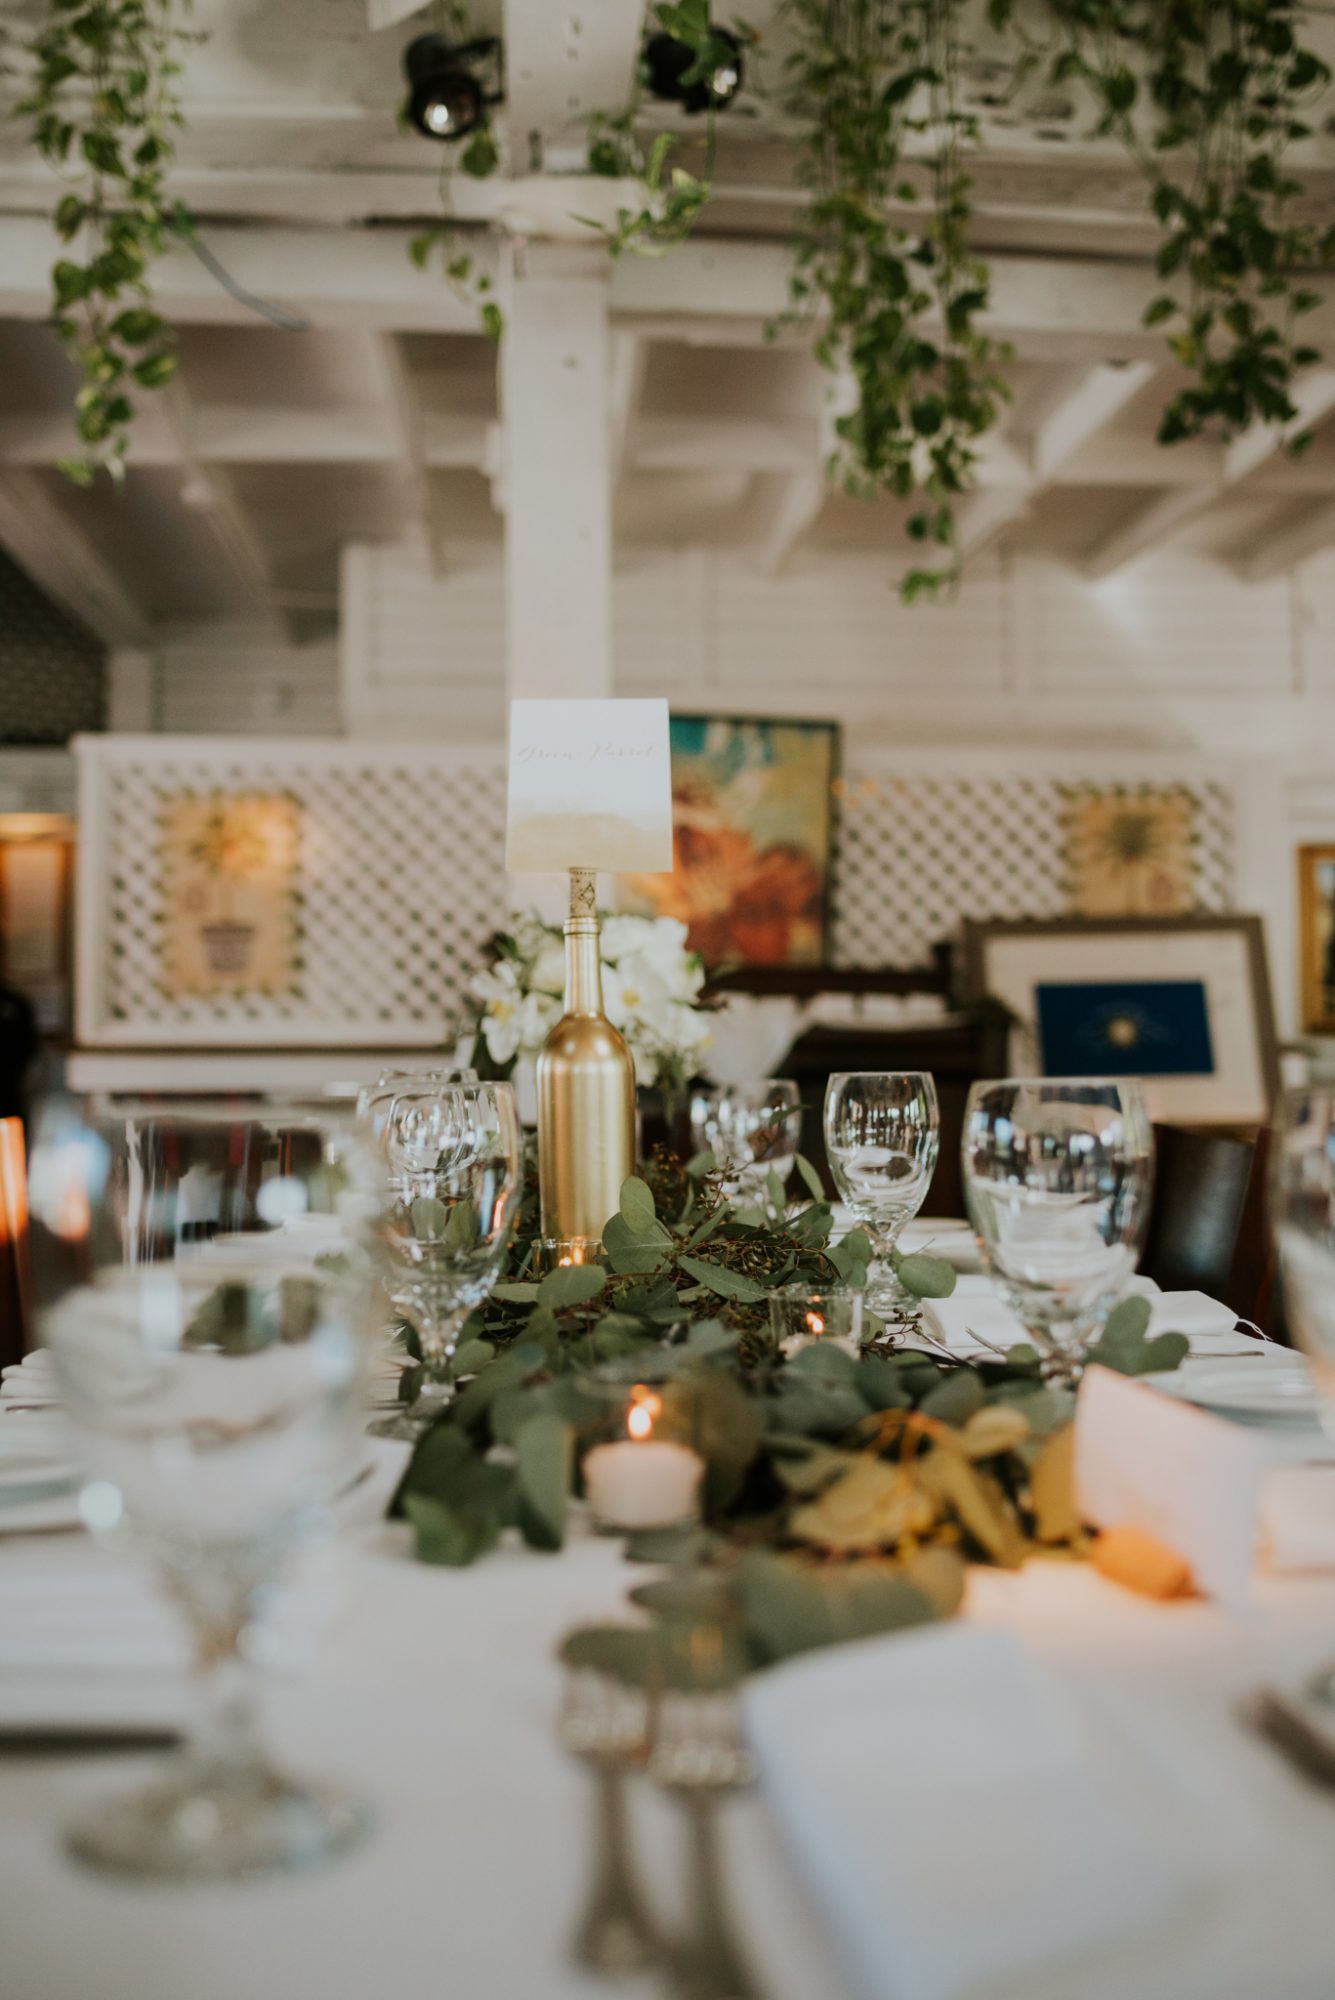 A table setting with greenery and wine glasses captured by Erika & David, Key West wedding photographers at St Mary's + Rooftop Cafe.